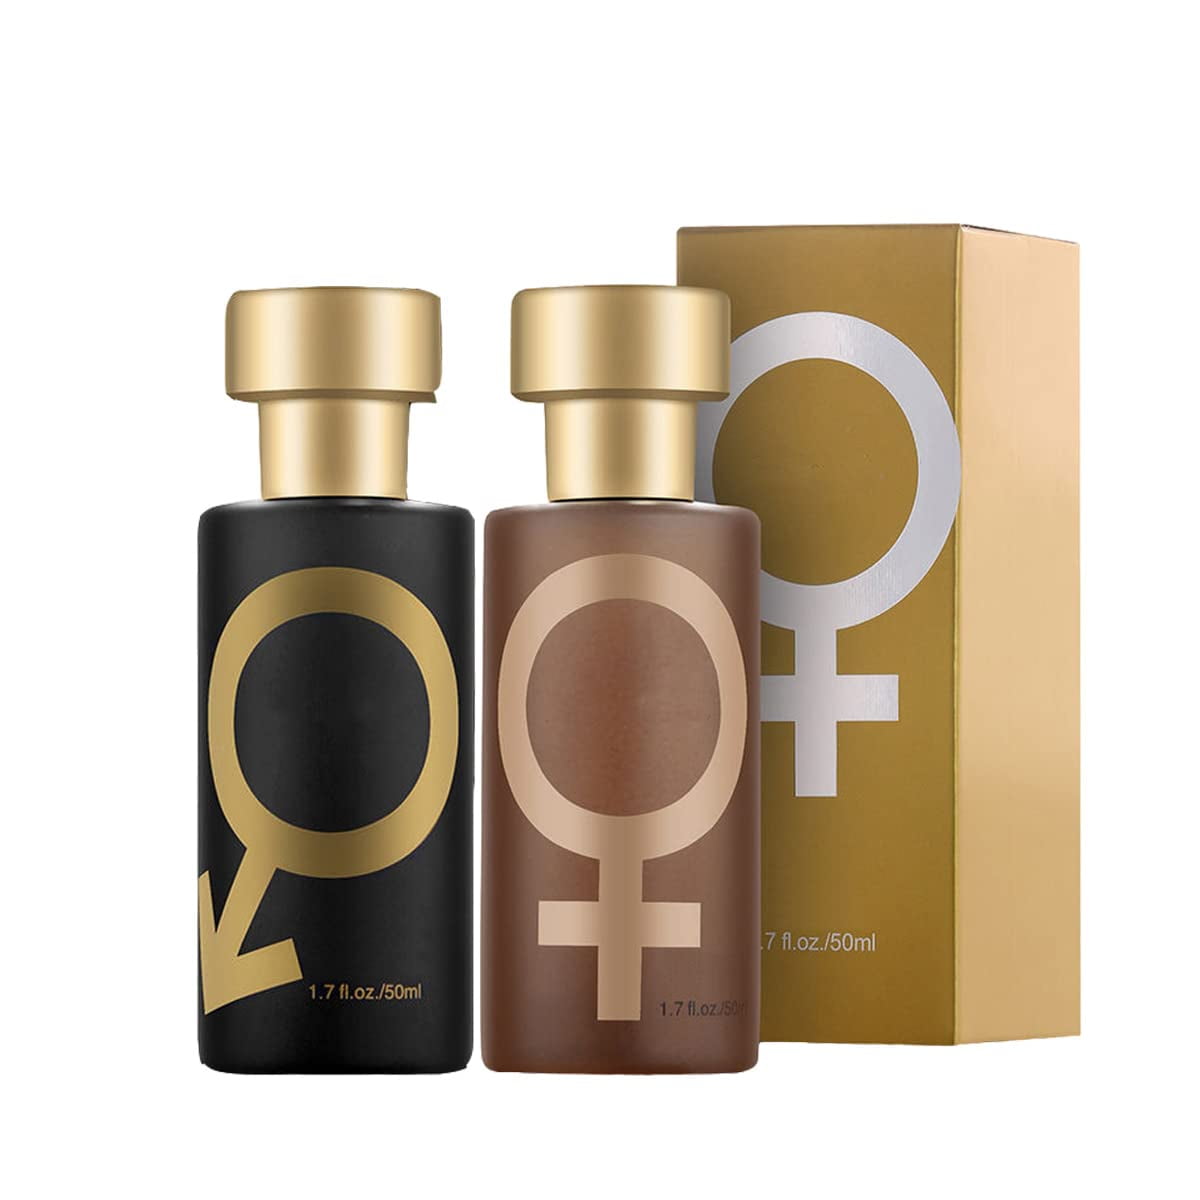 L5 PCS ure Her Perfume for Women - Lure Pheromone Perfume,Golden Pheromone  Cologne for Men Attract Women (for He),If you don't get 5, you will receive  a full refund 